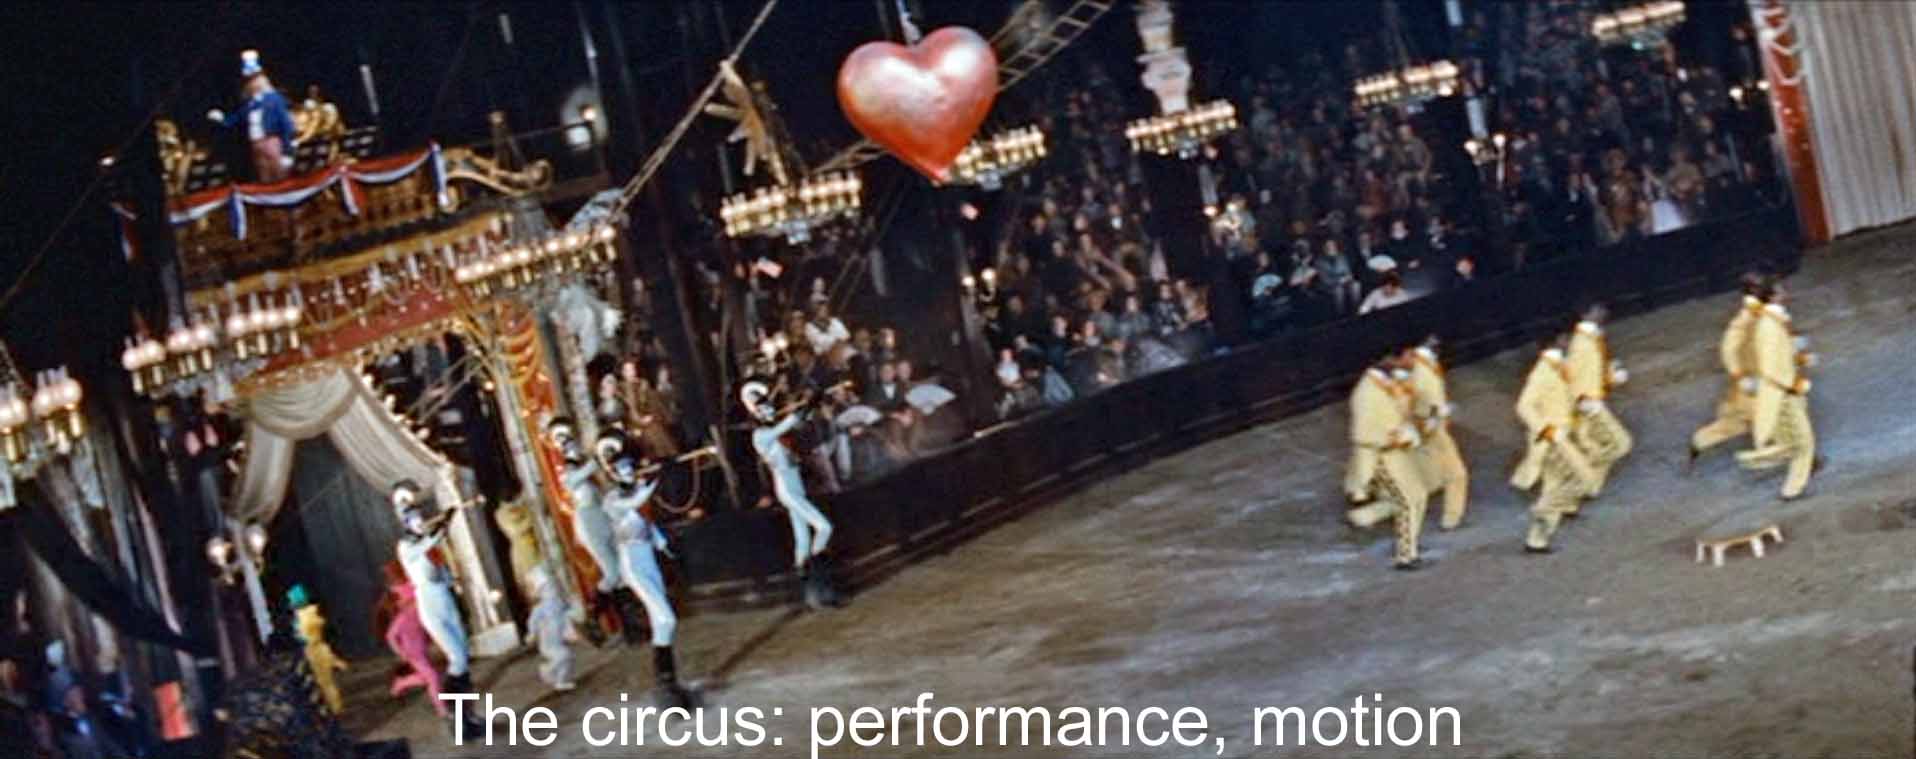 The circus, performance, motion